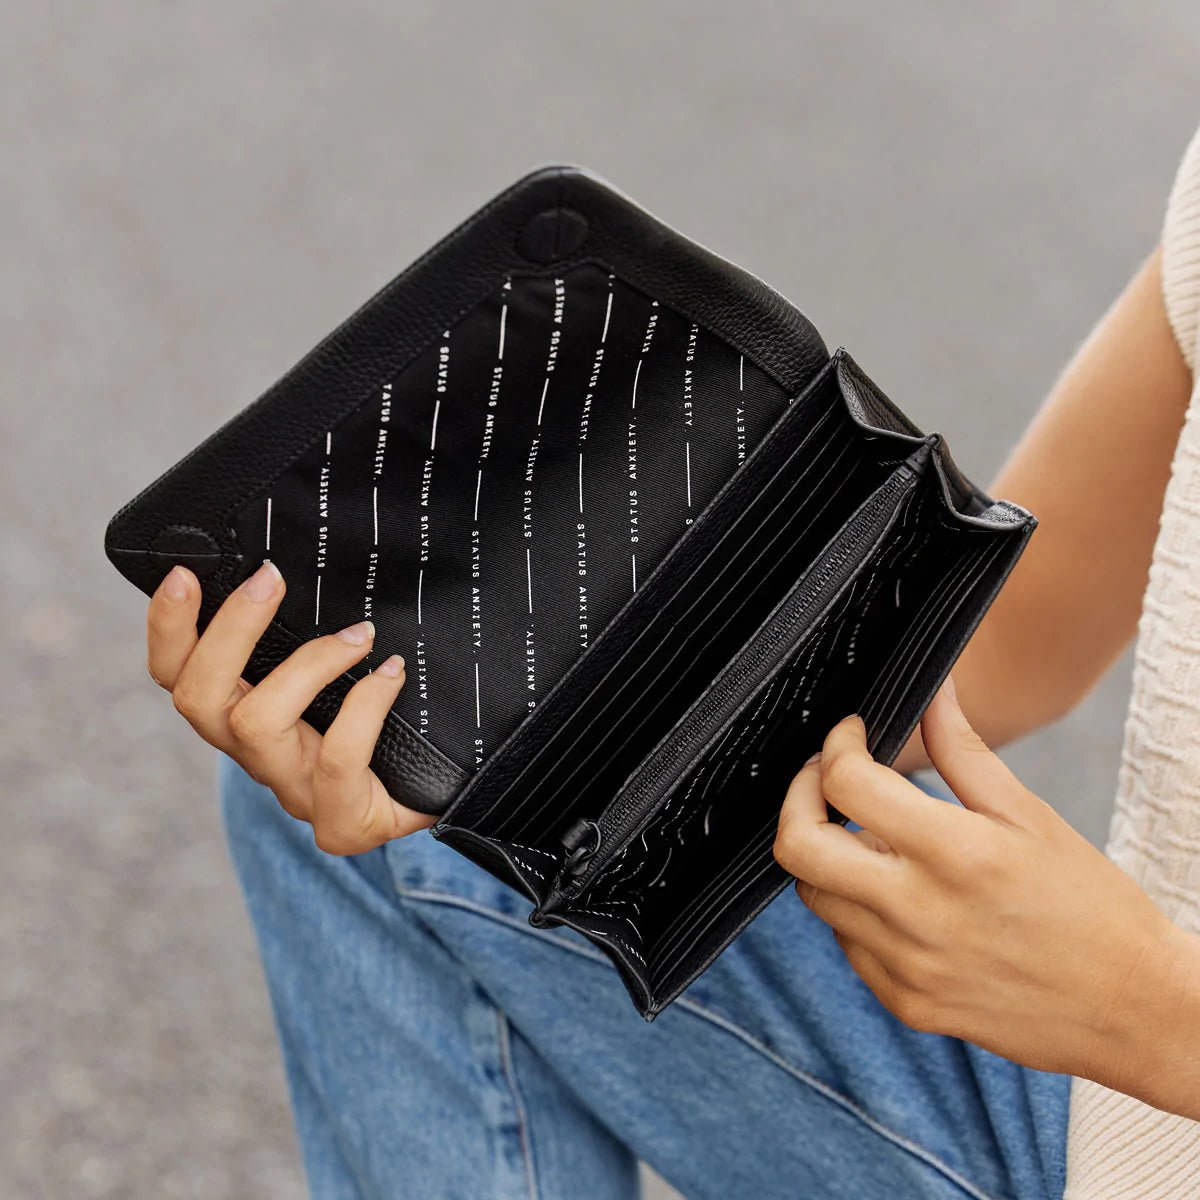 Remnant Wallet // Black ~ Status Anxiety ~